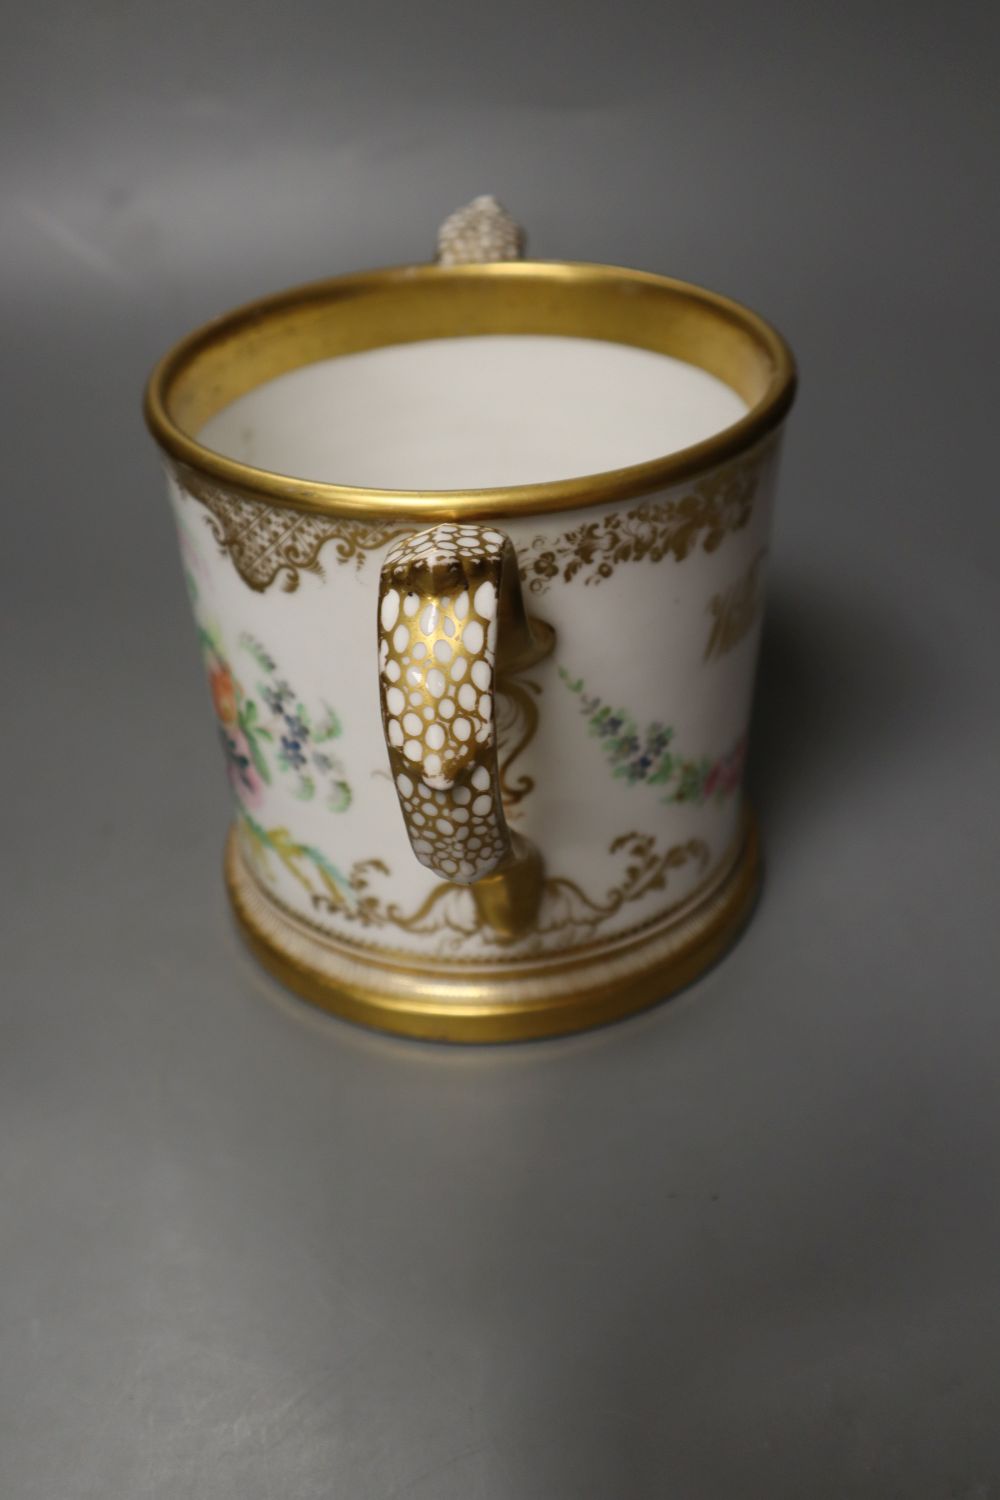 An English porcelain two handled mug lavishly painted with flowers, inscribed verso William Brown 1854, 14cm